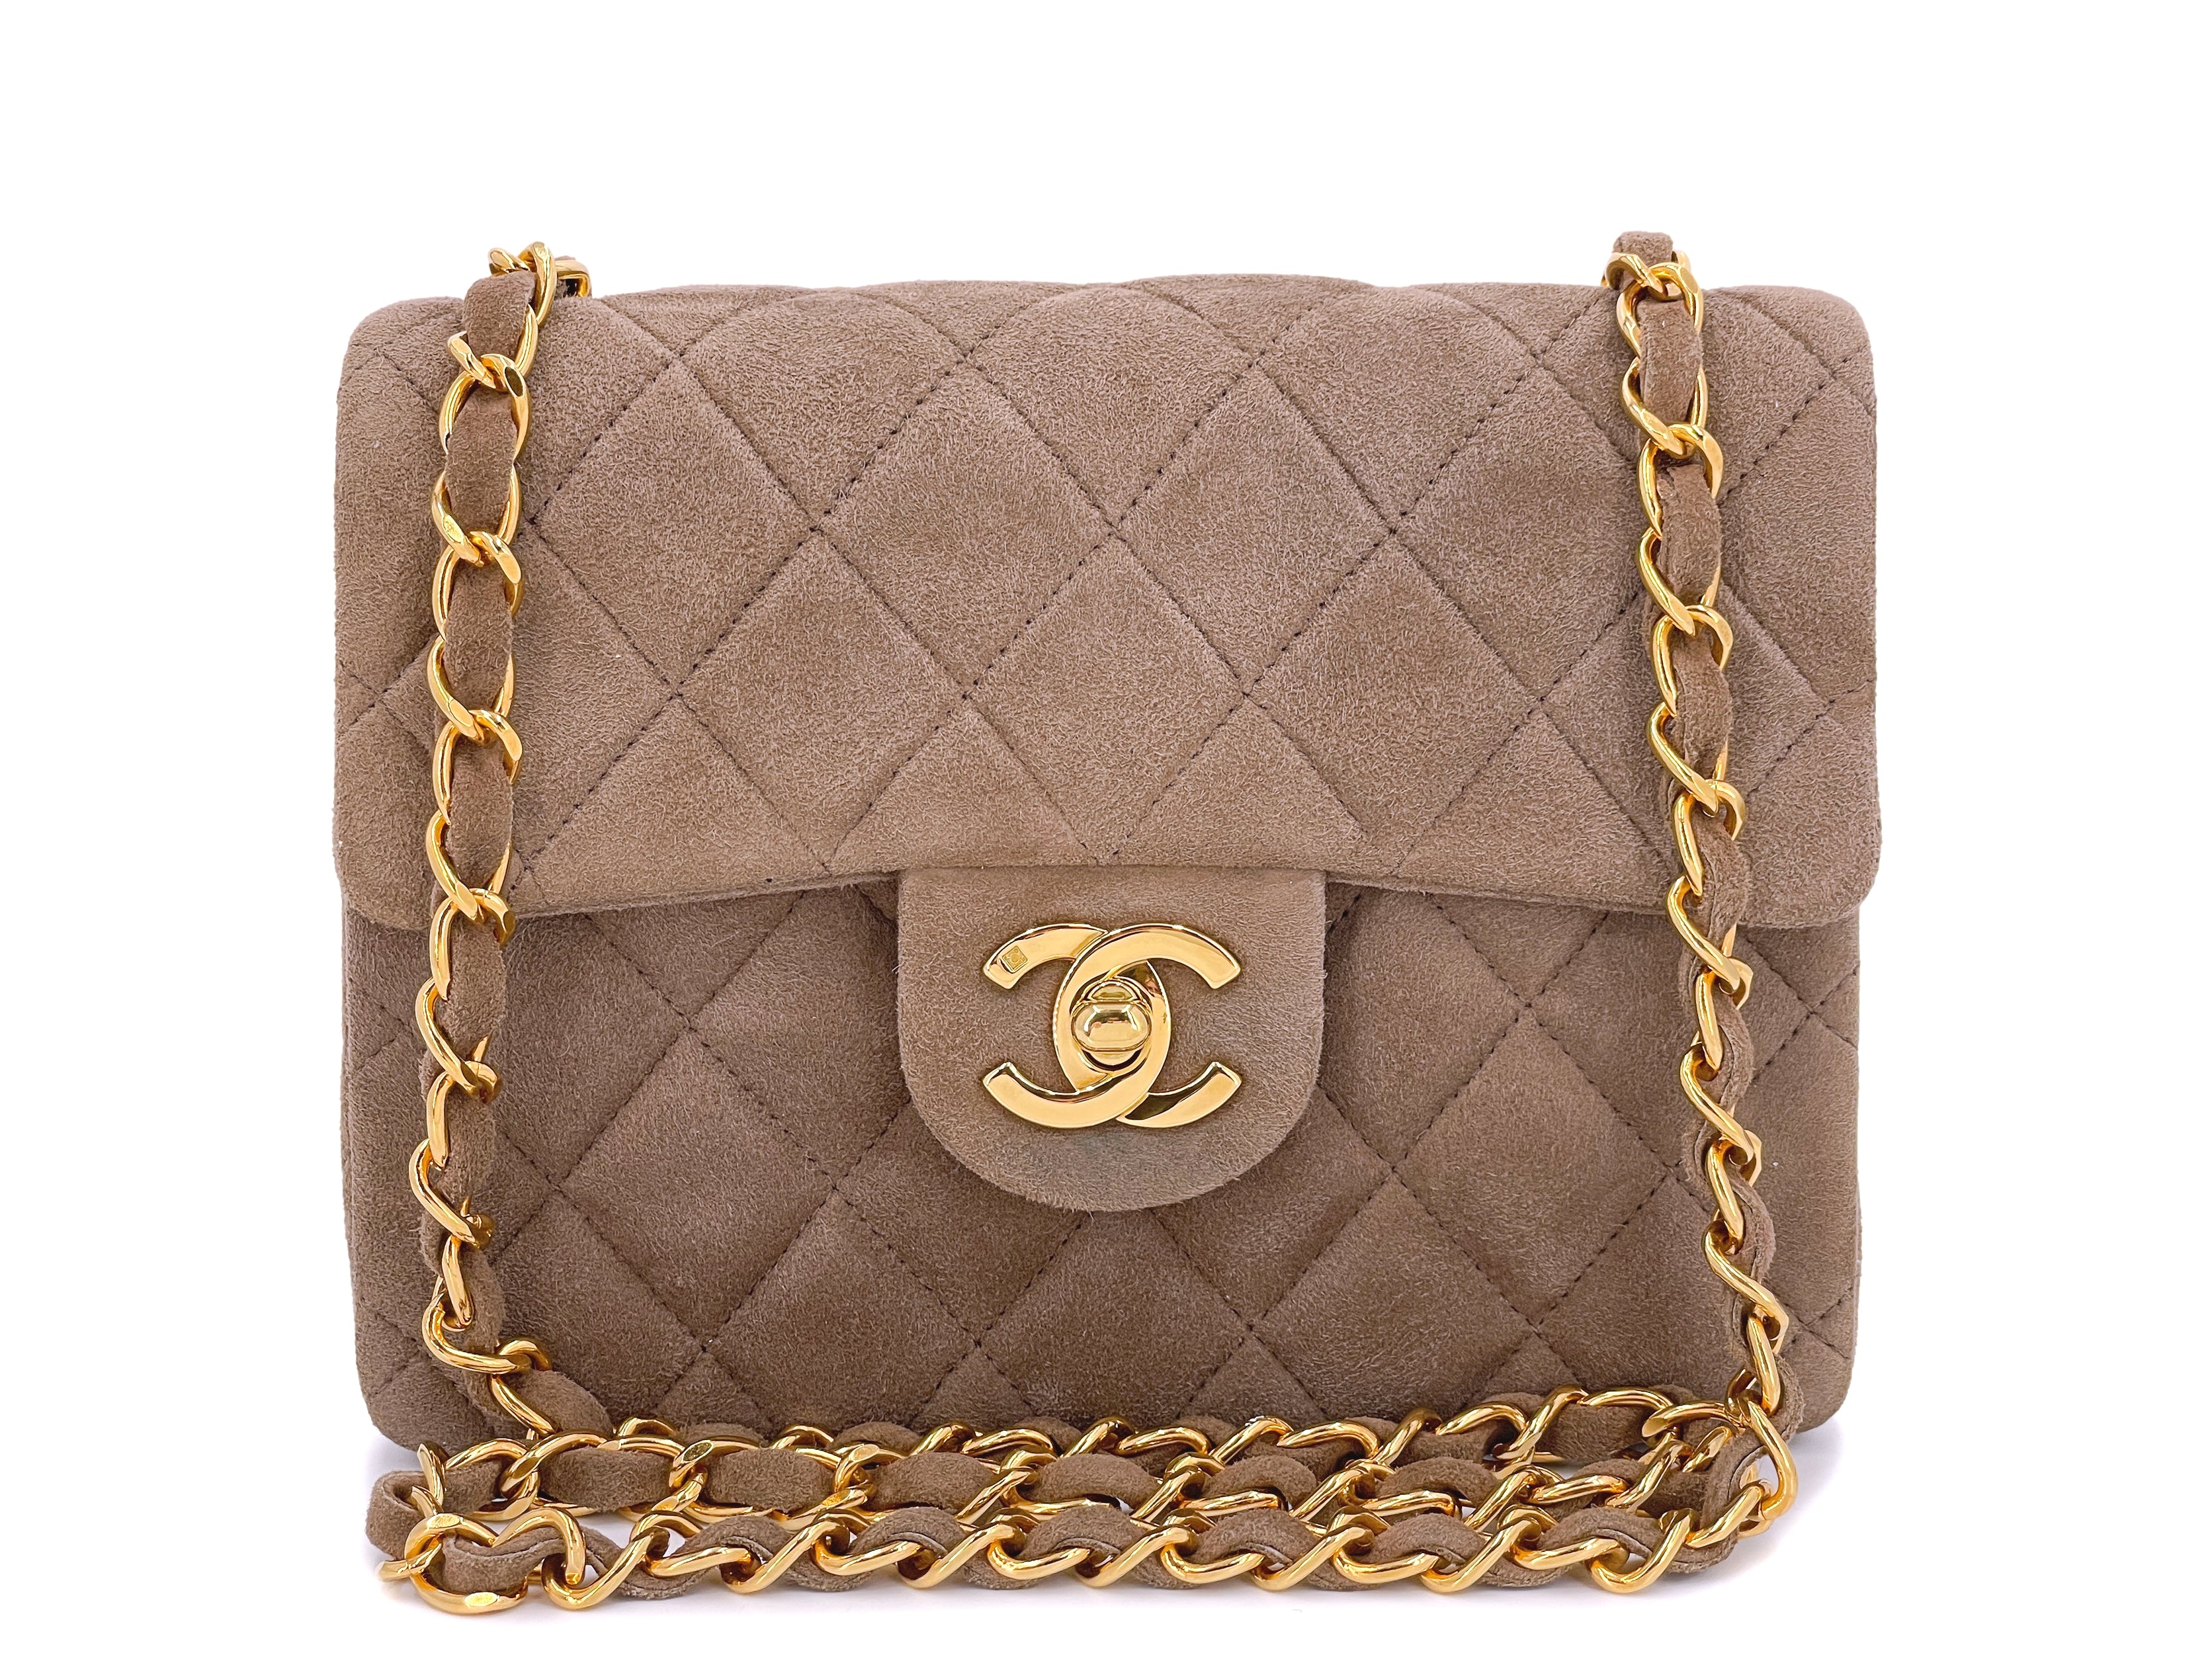 Chanel 1994 Vintage Taupe-Chocolate Brown Suede Square Mini